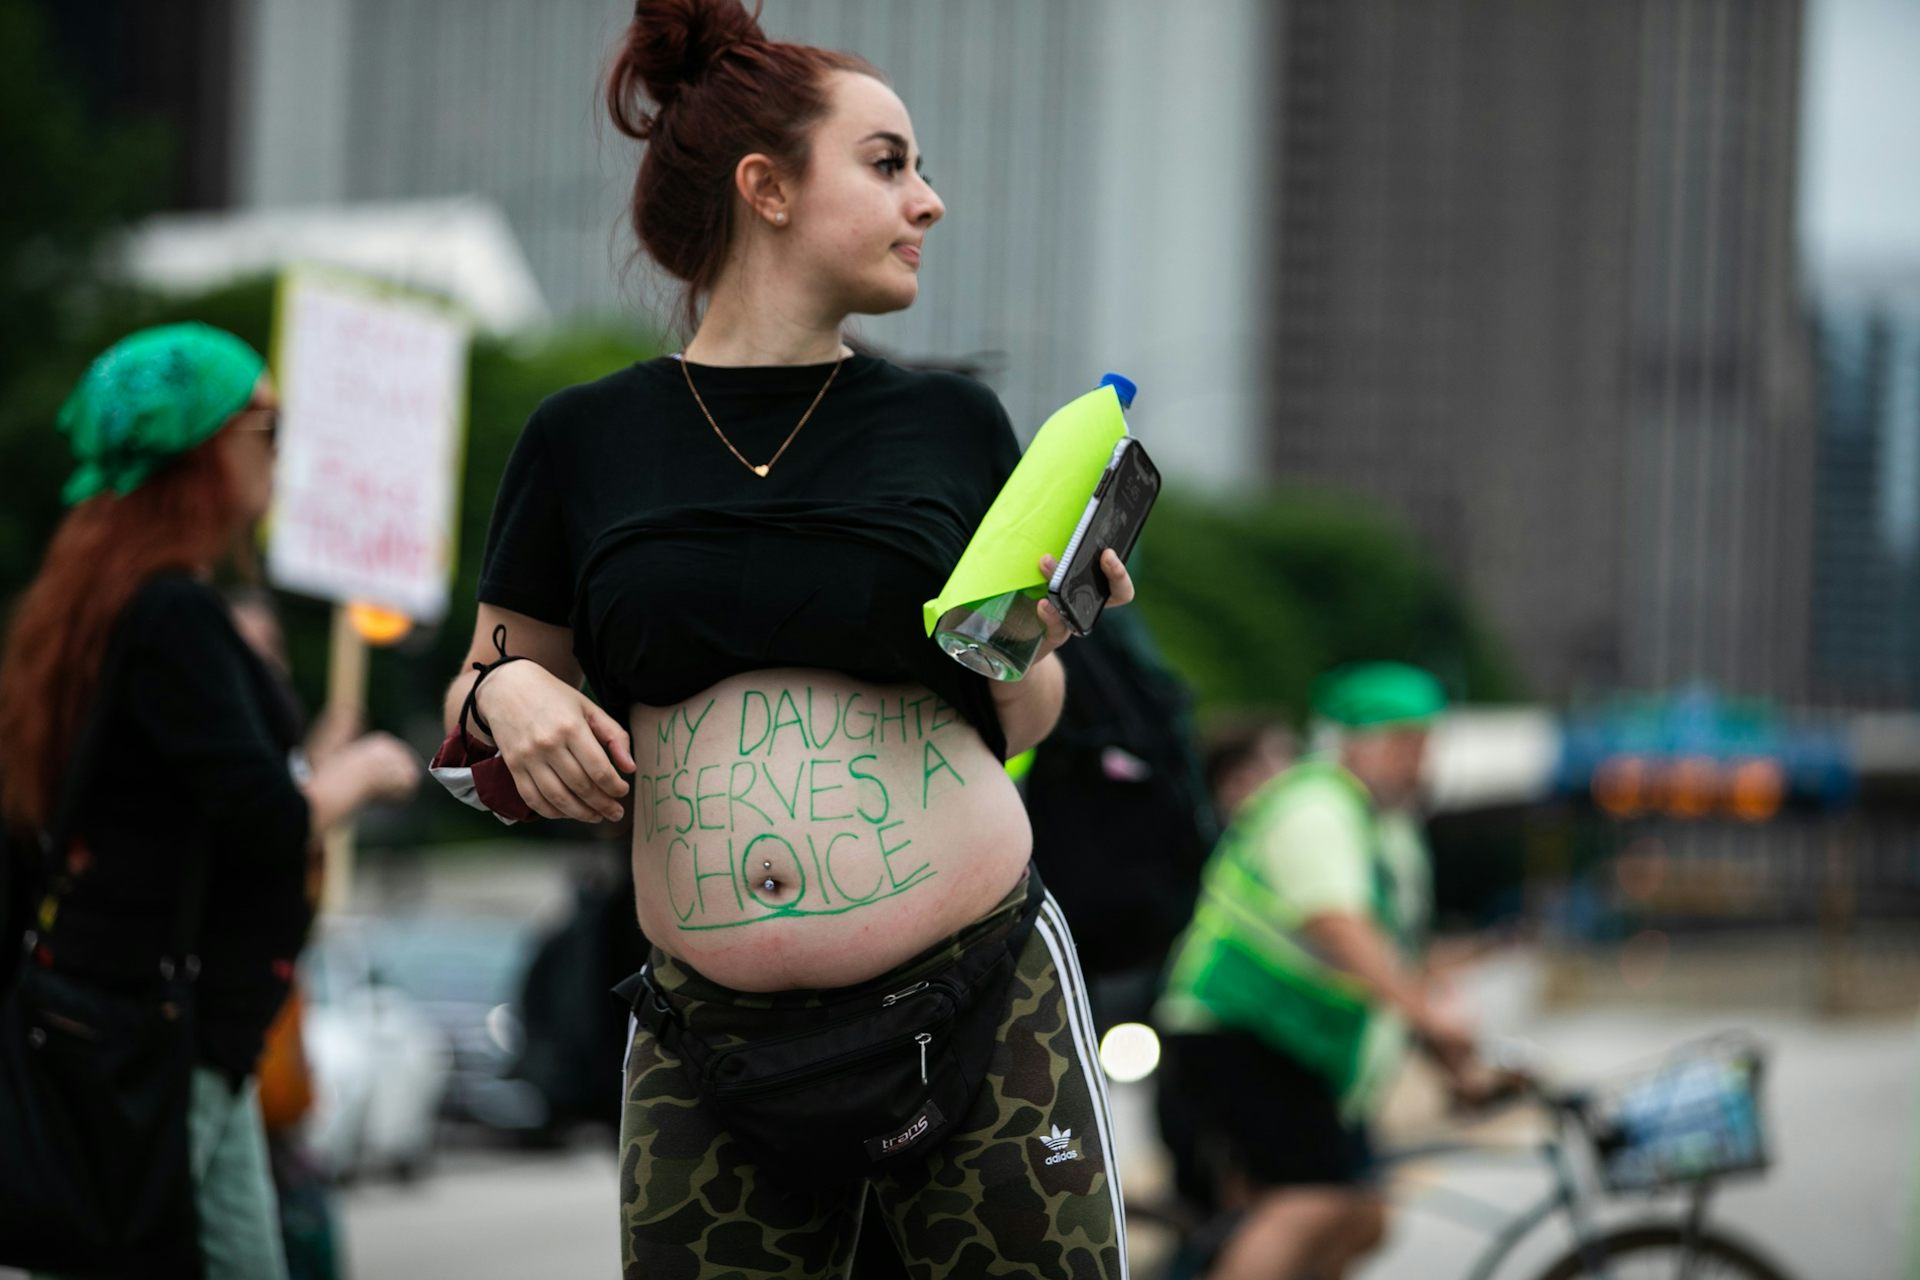 A pregnant person has a written message on the skin of her belly: 'My daughter deserves a choice'